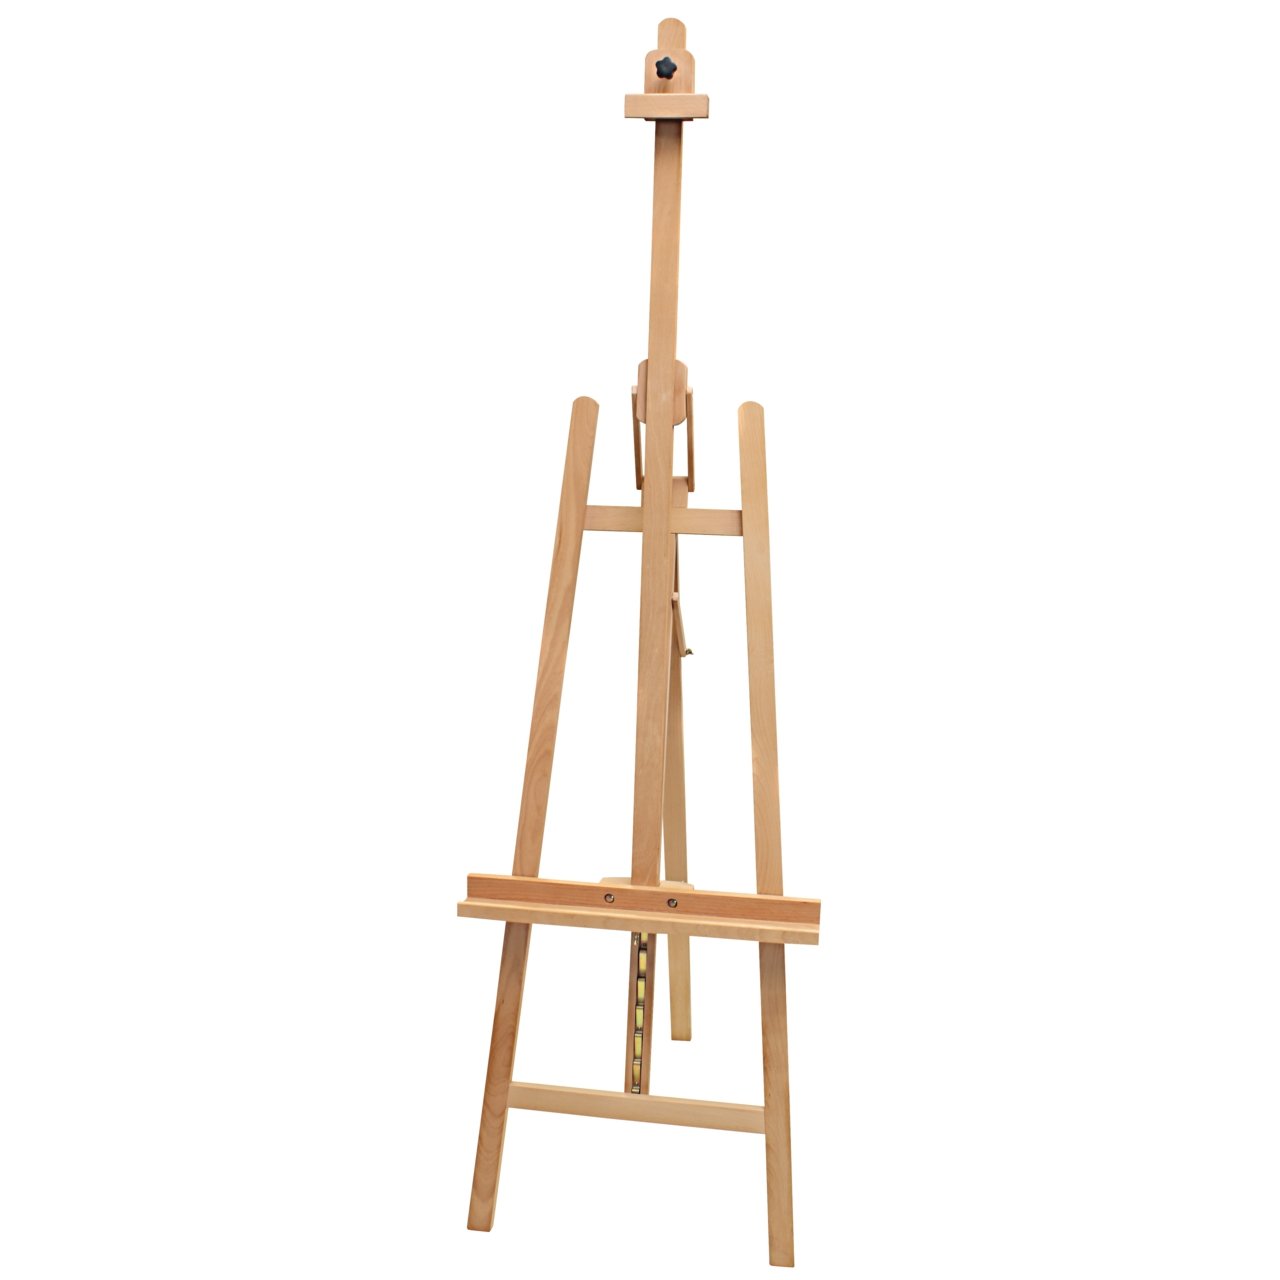 Art Alternatives Inclinable Lyre Easel (assembly required) - merriartist.com